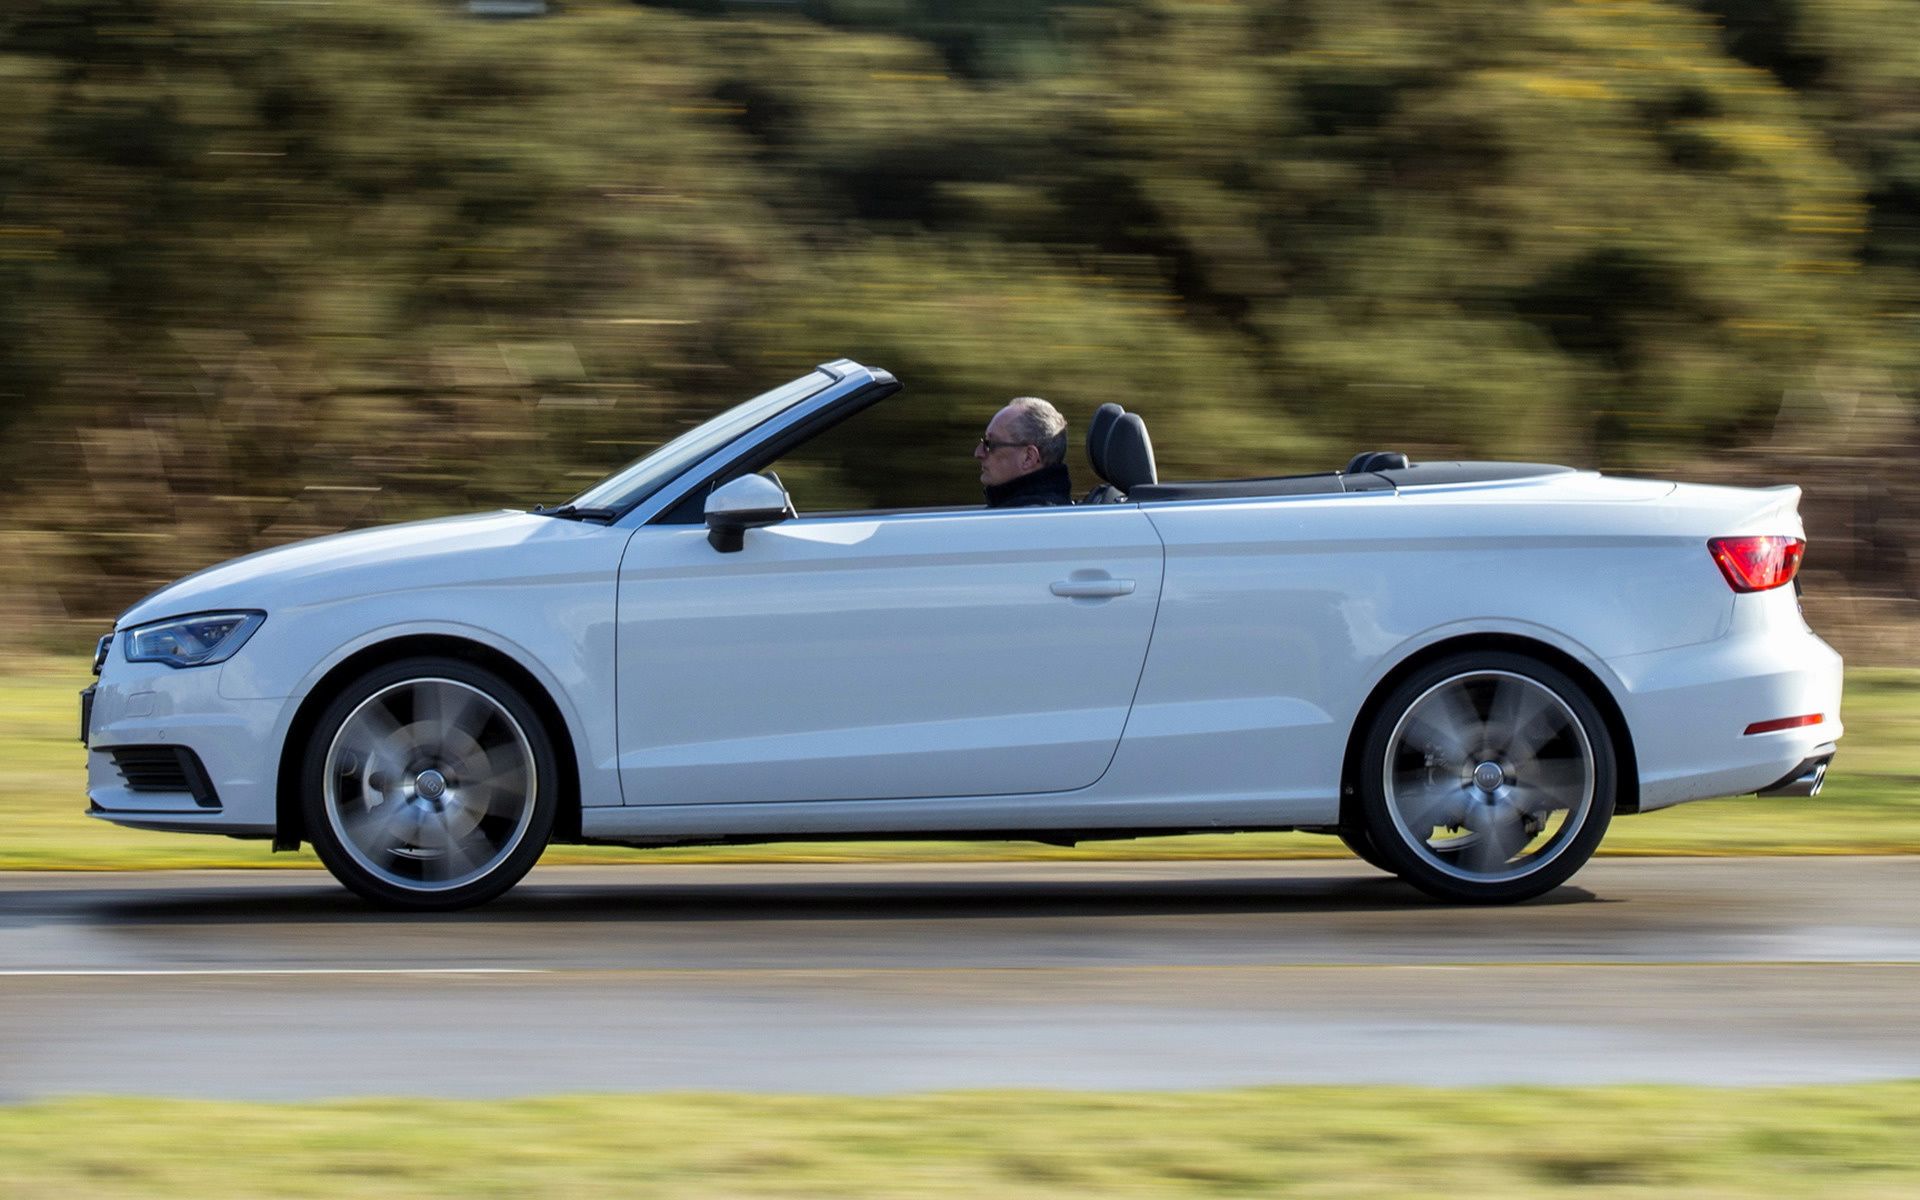 Audi A3 Cabriolet (UK) and HD Image